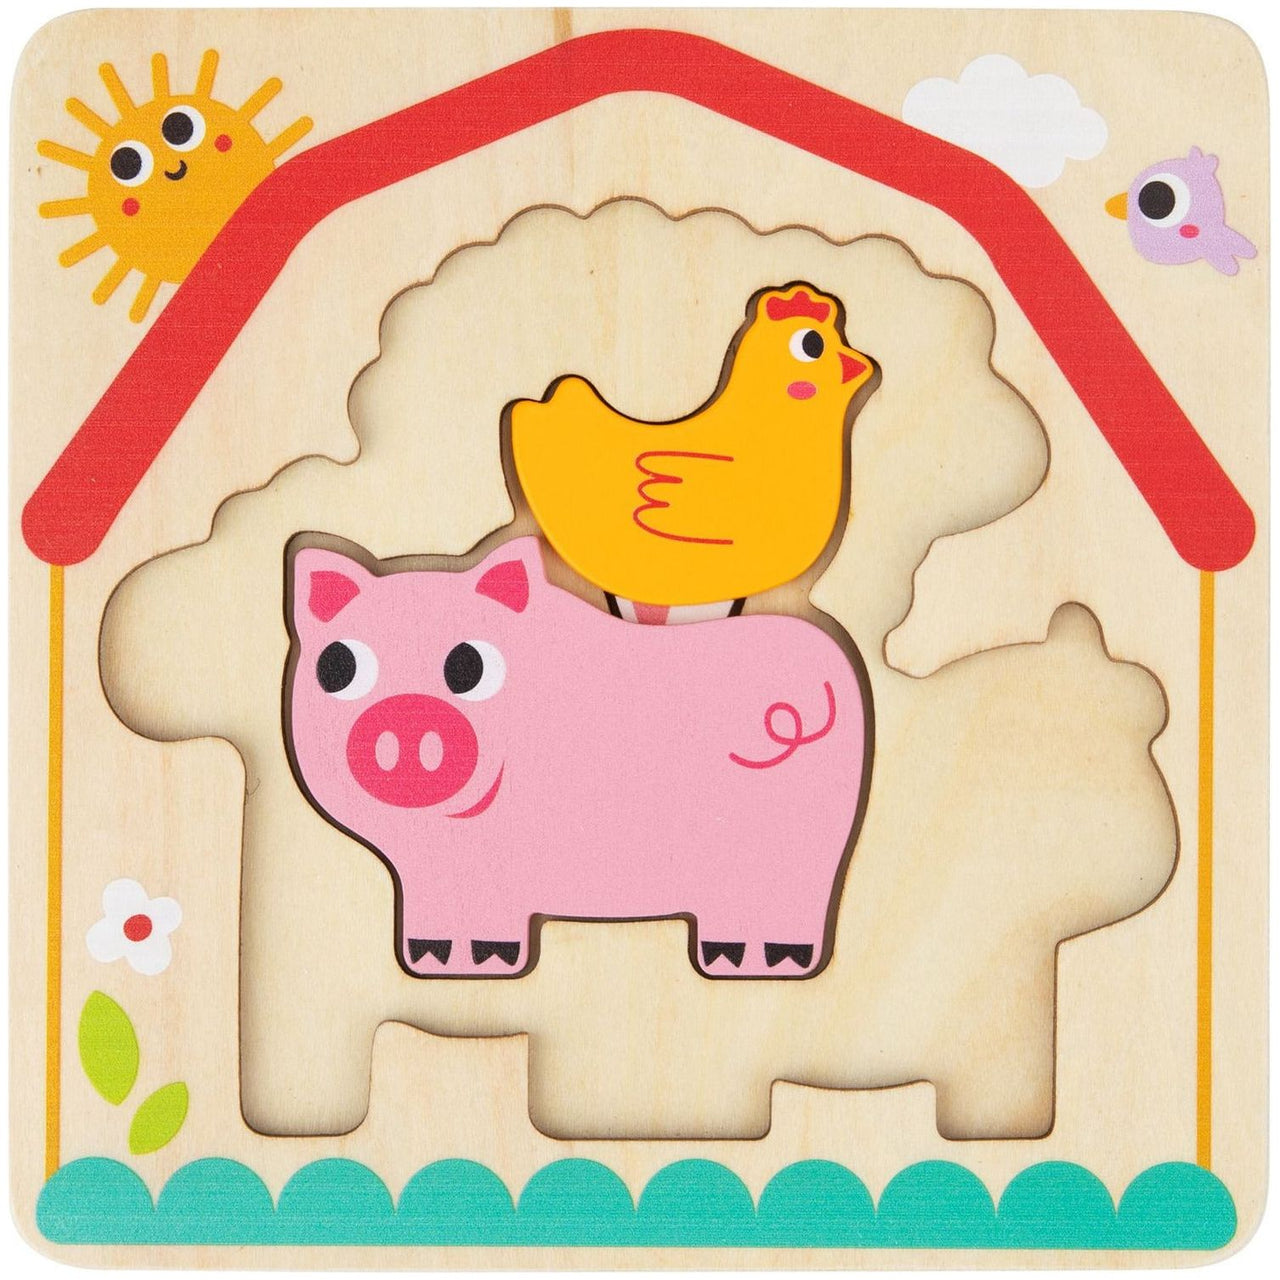 Tooky Toy Wooden Multi-Layered Farm Puzzle Tooky Toy